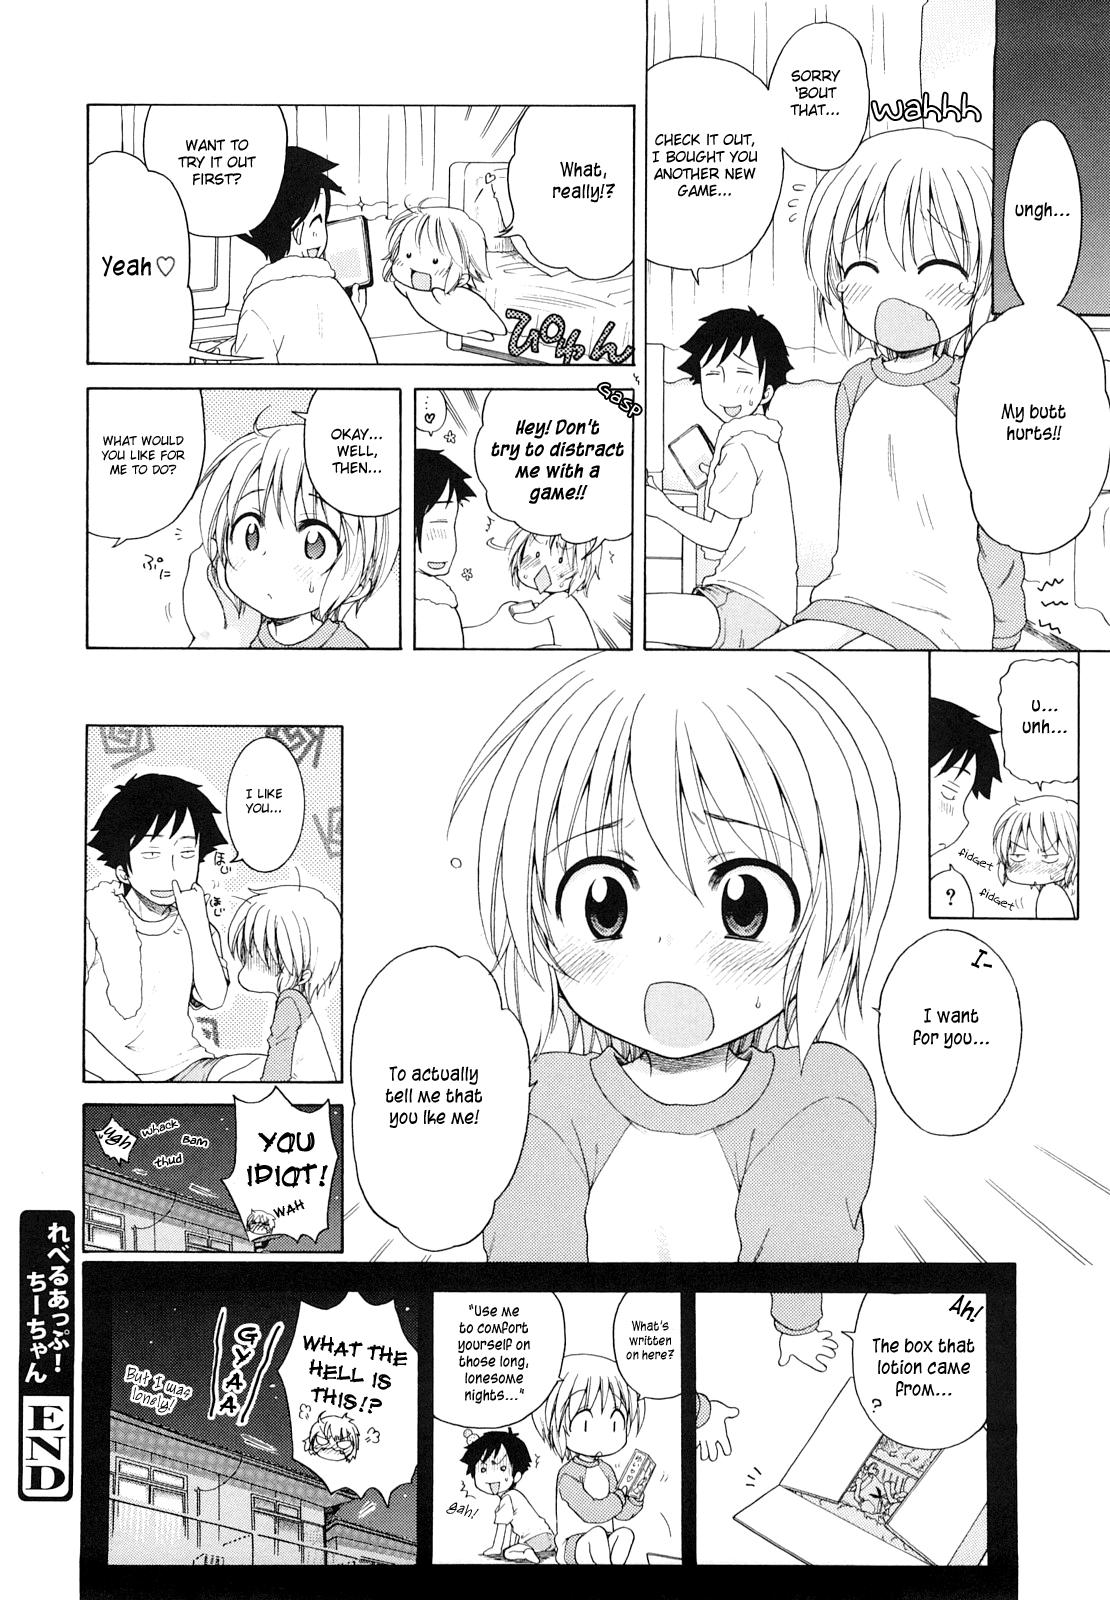 Gostoso Level Up! Chii-chan Real Amateur Porn - Page 23